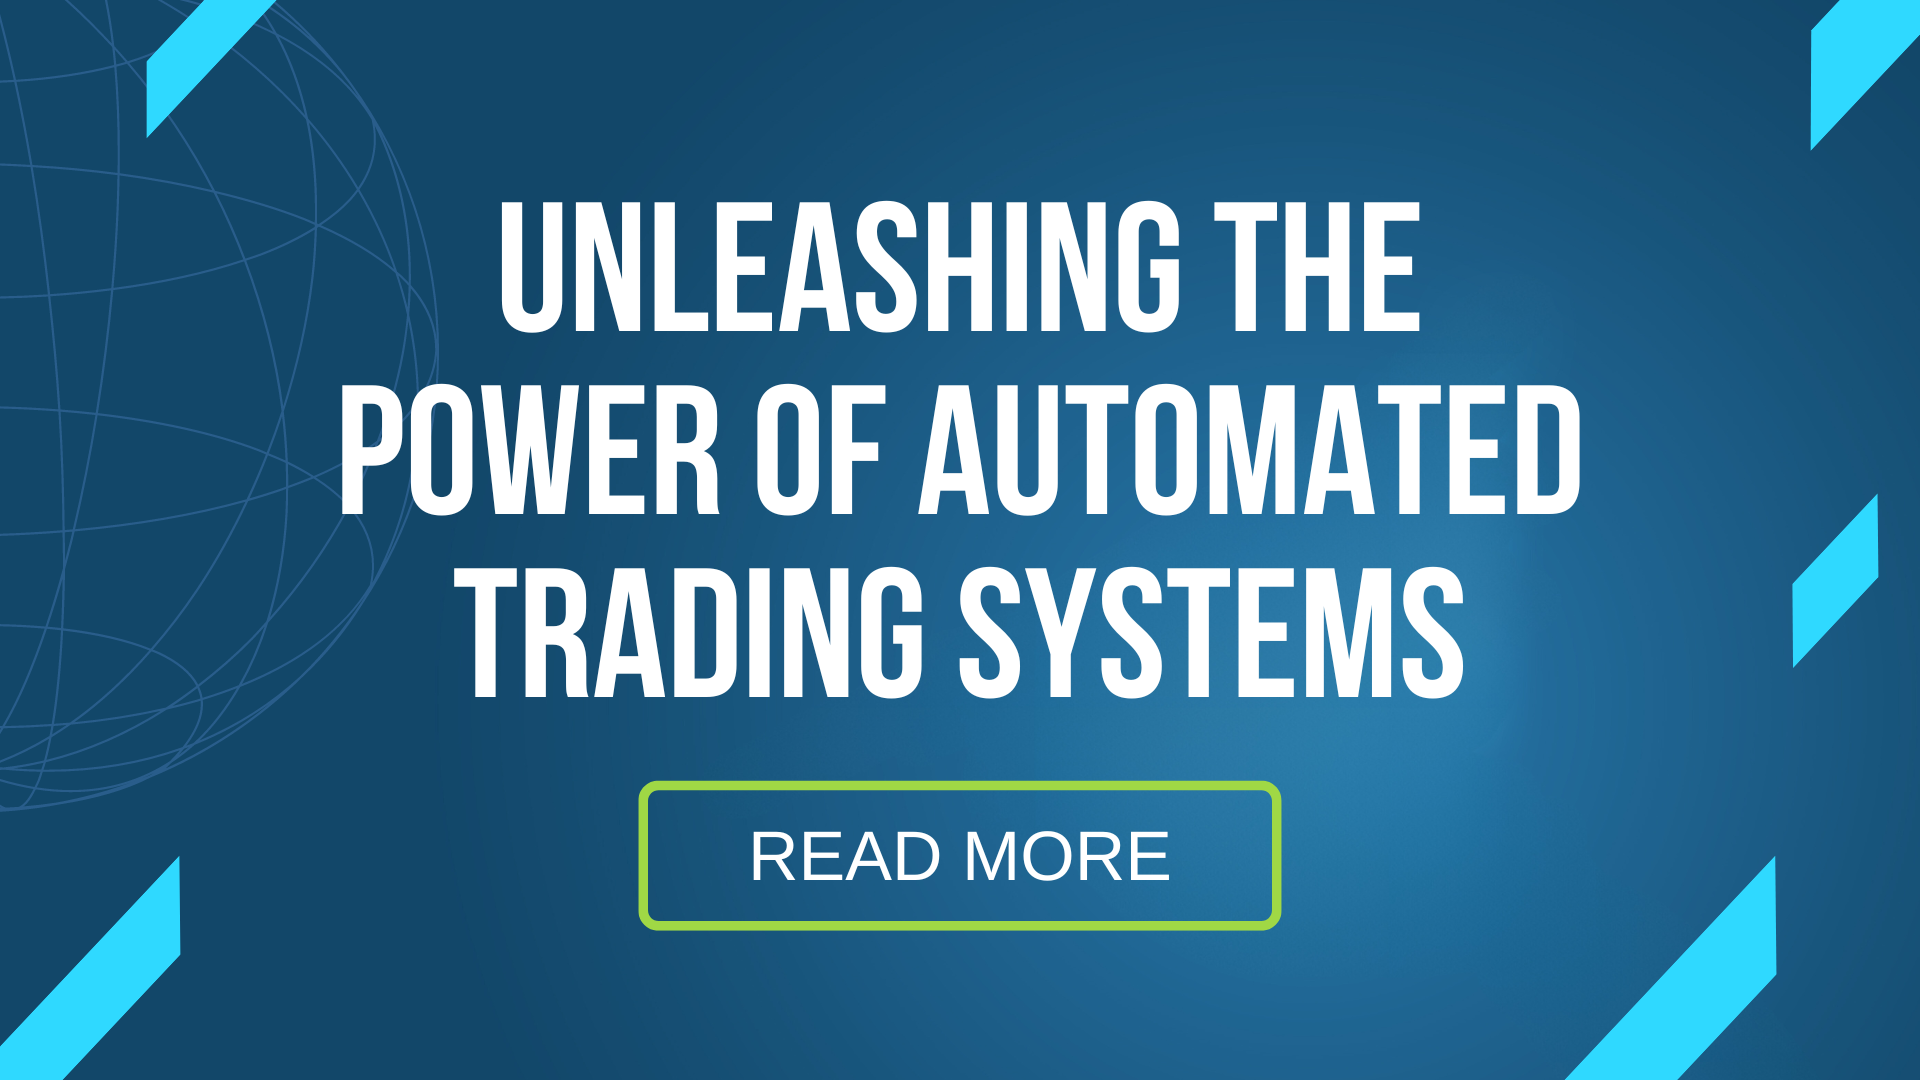 Unleashing-the-Power-of-Automated-Trading-Systems